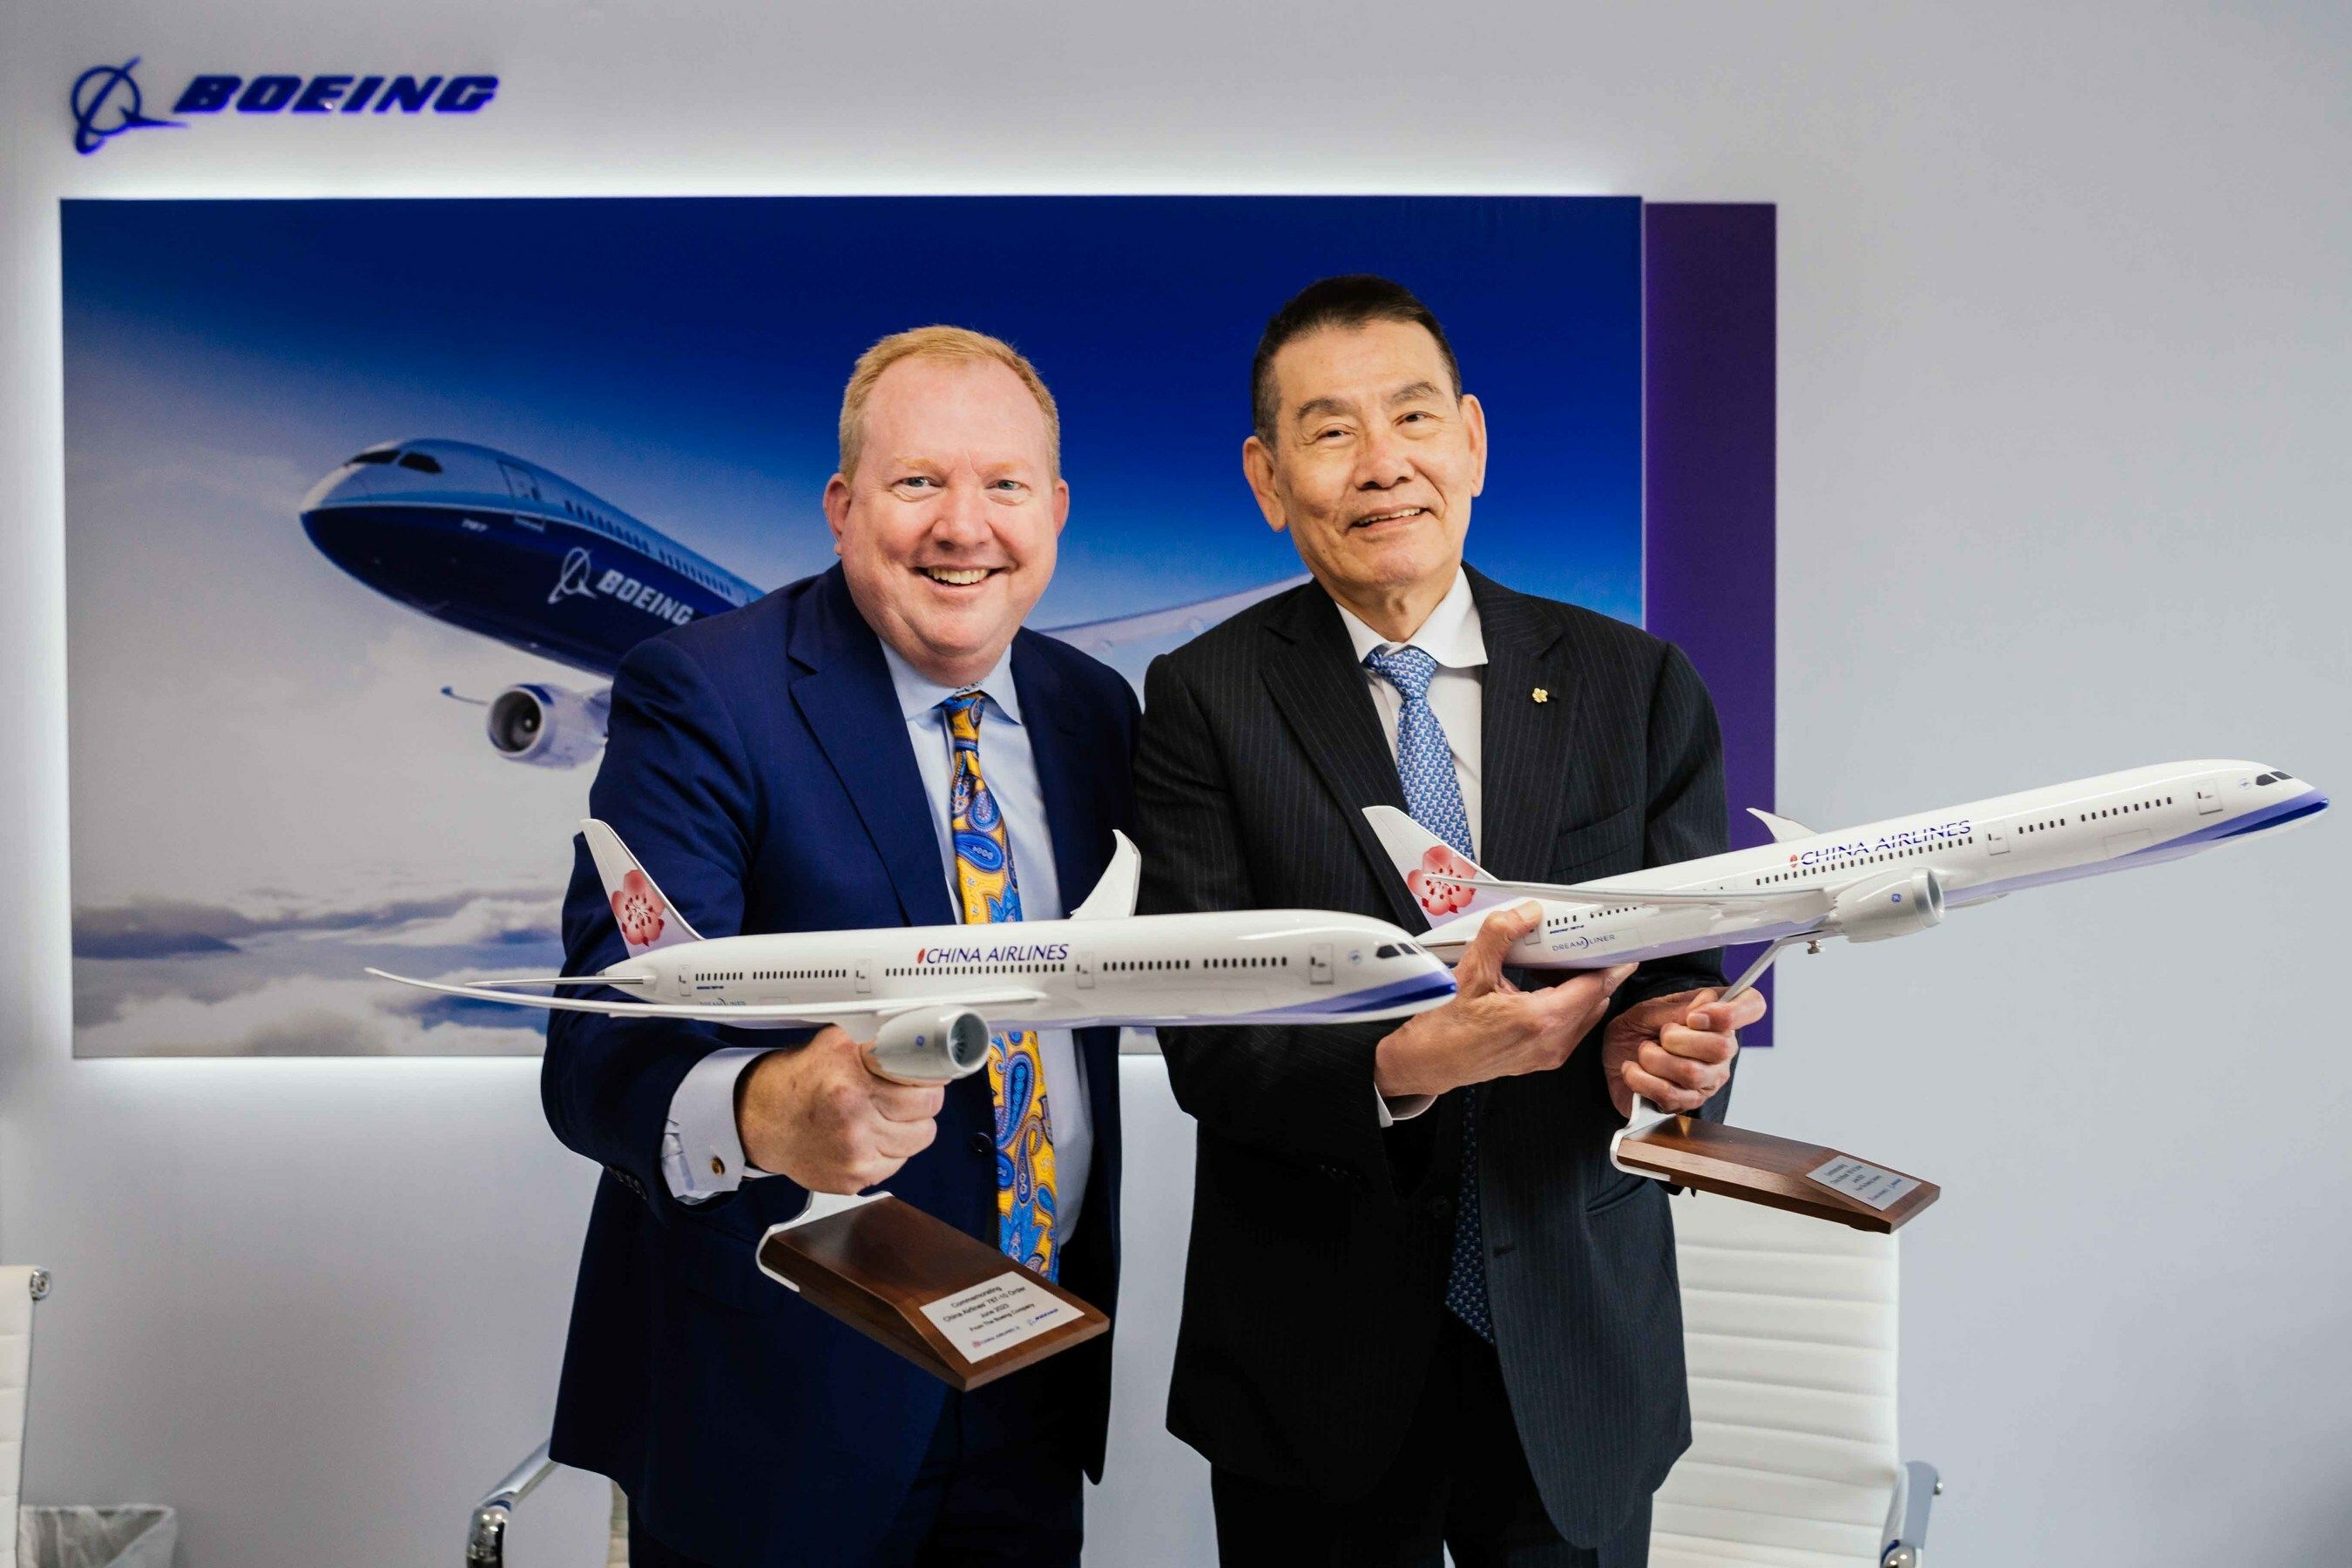 China Airlines and Boeing representatives show two Boeing 787 models with China Airlines' livery.